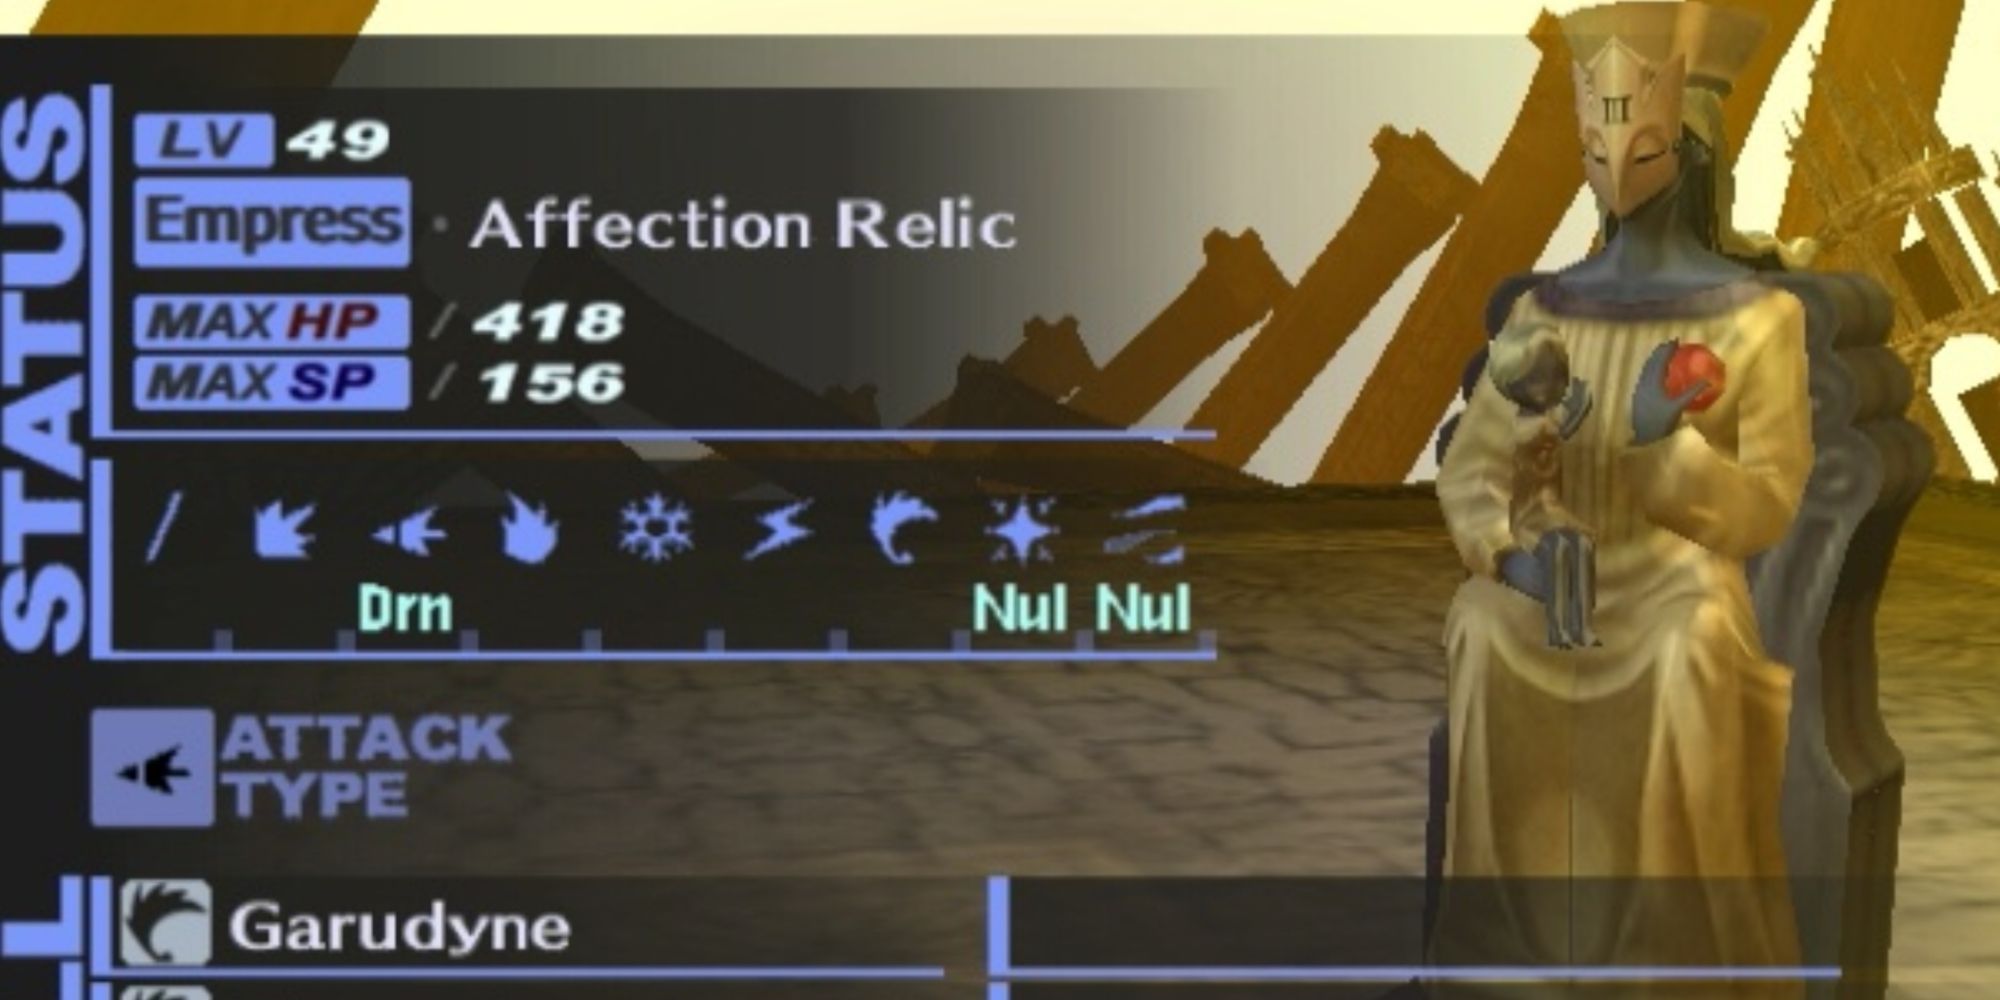 screenshot of affection relic from persona 3